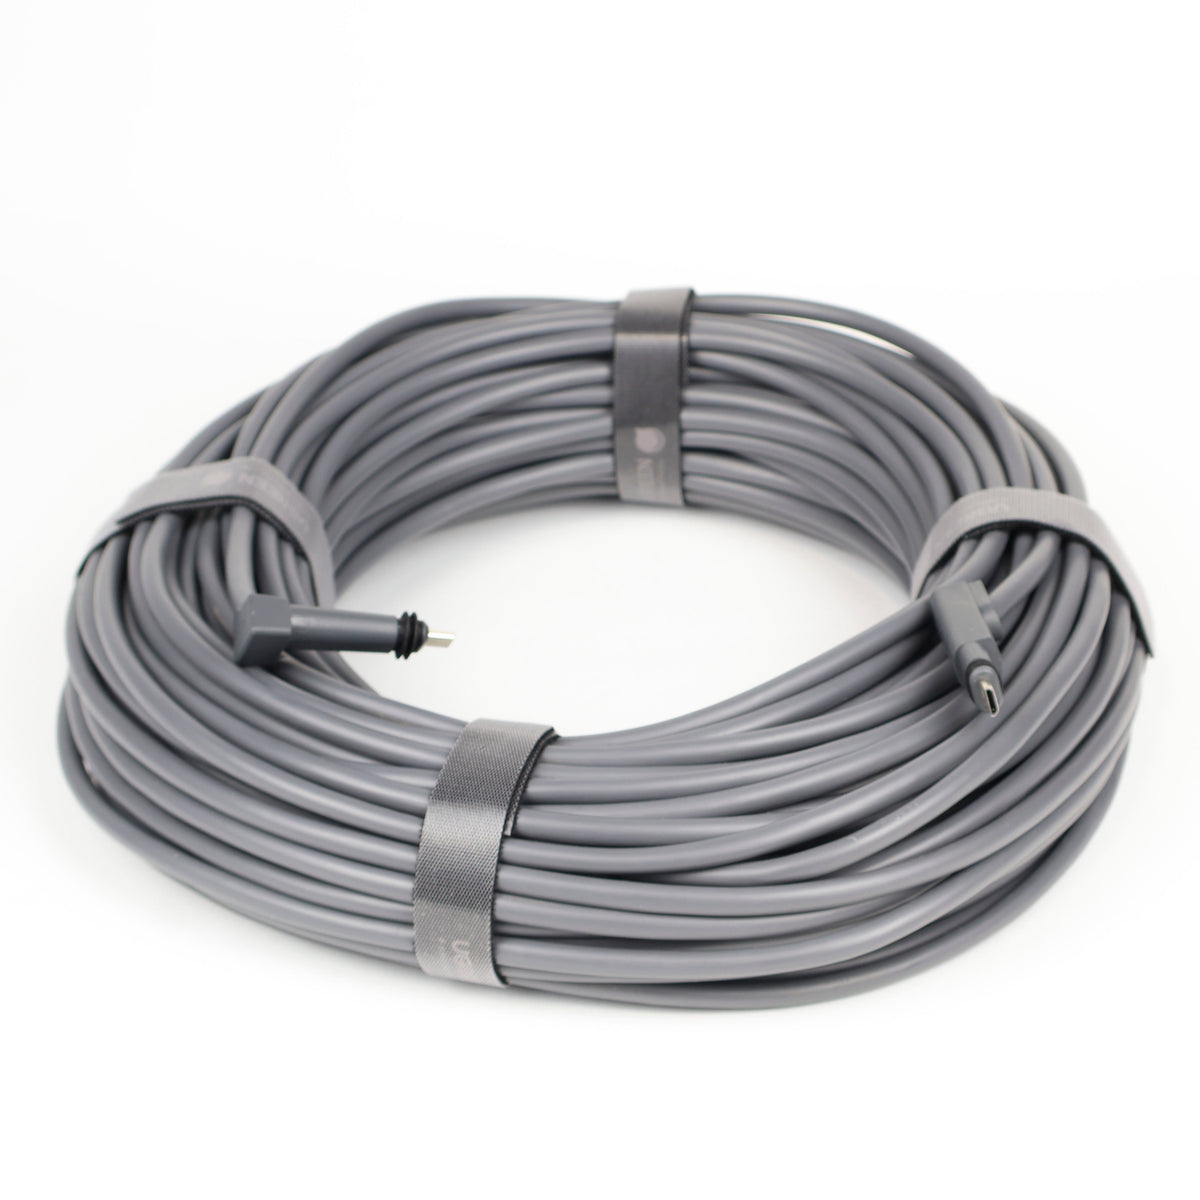 Starlink SPX Cable - 46m (150ft) - EVAAM